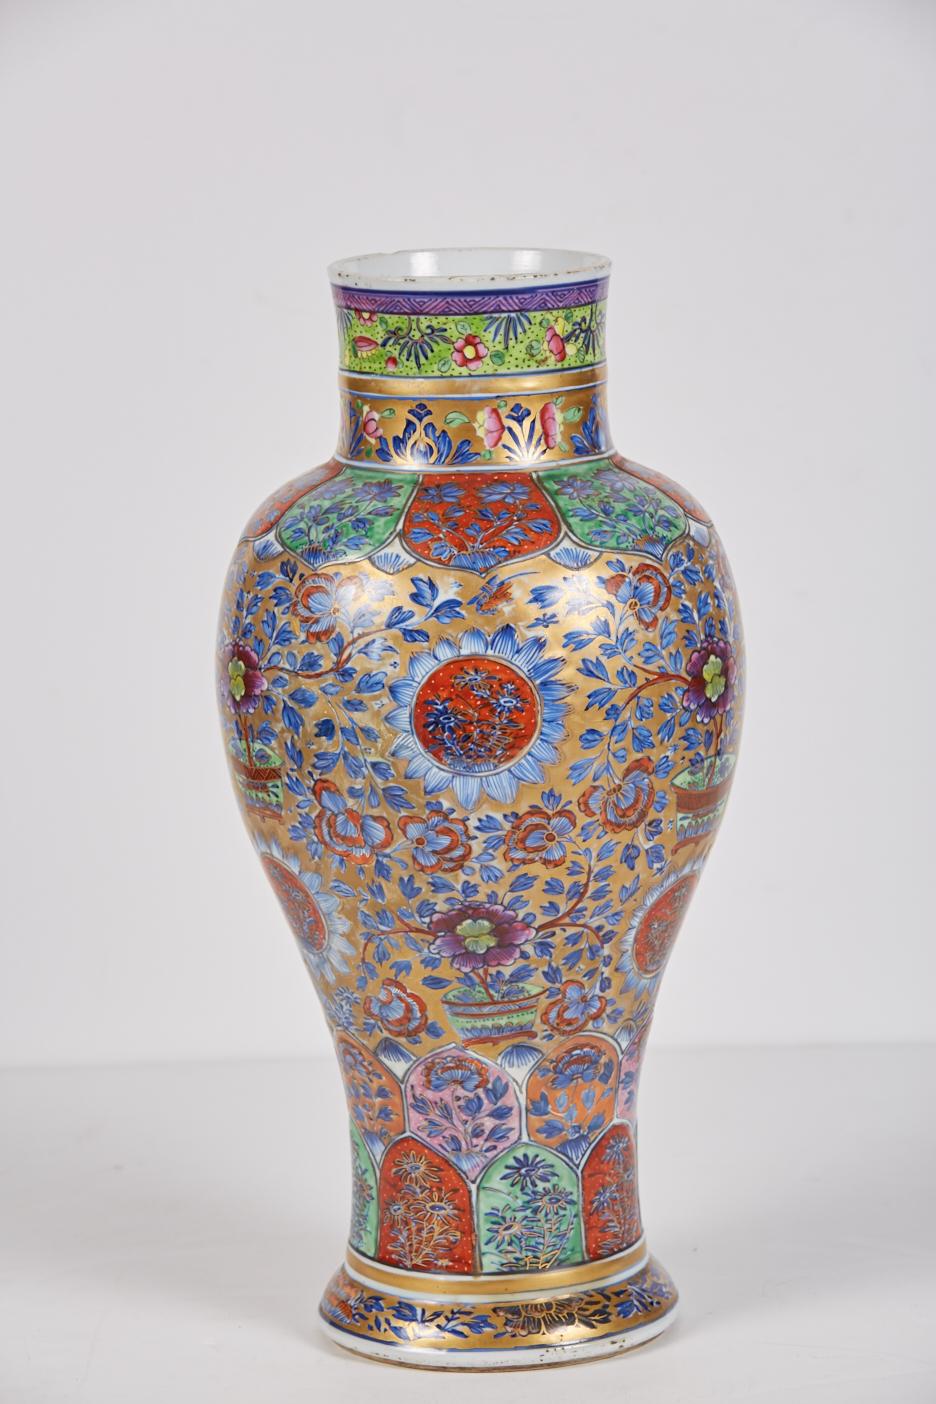 Very large polychrome clobbered 18th century Chinese export porcelain vase decorated in England in the 19th century. The base has a double circle in under glaze blue with an unidentifiable center mark (perhaps sacred fungus), again in under glaze